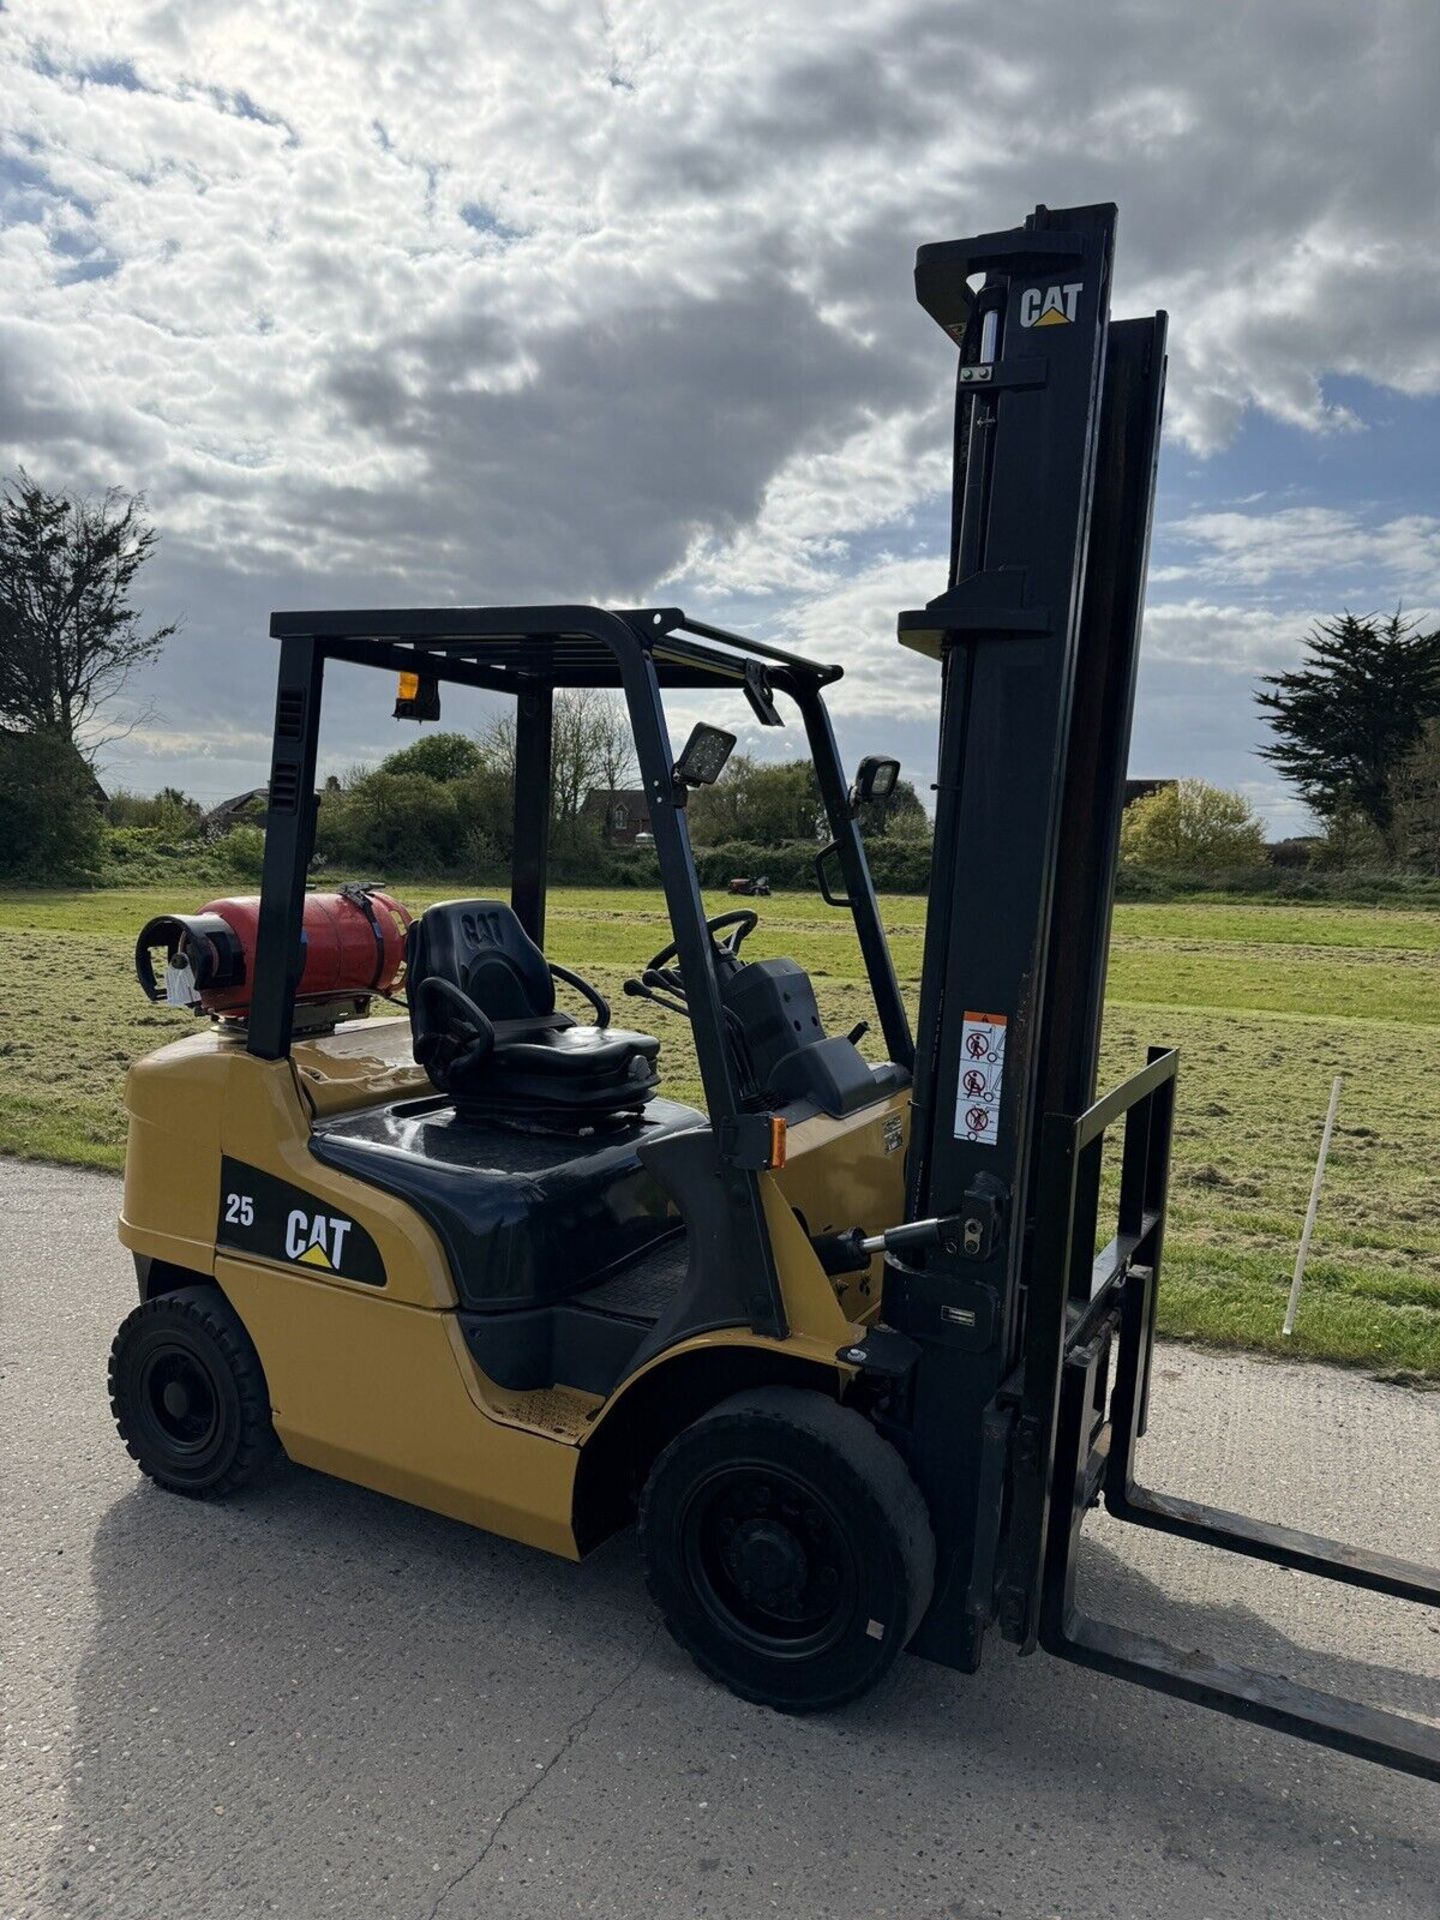 2015, CATERPILLAR - 2.5 Tonne Gas Forklift With Side Shift - Image 6 of 6